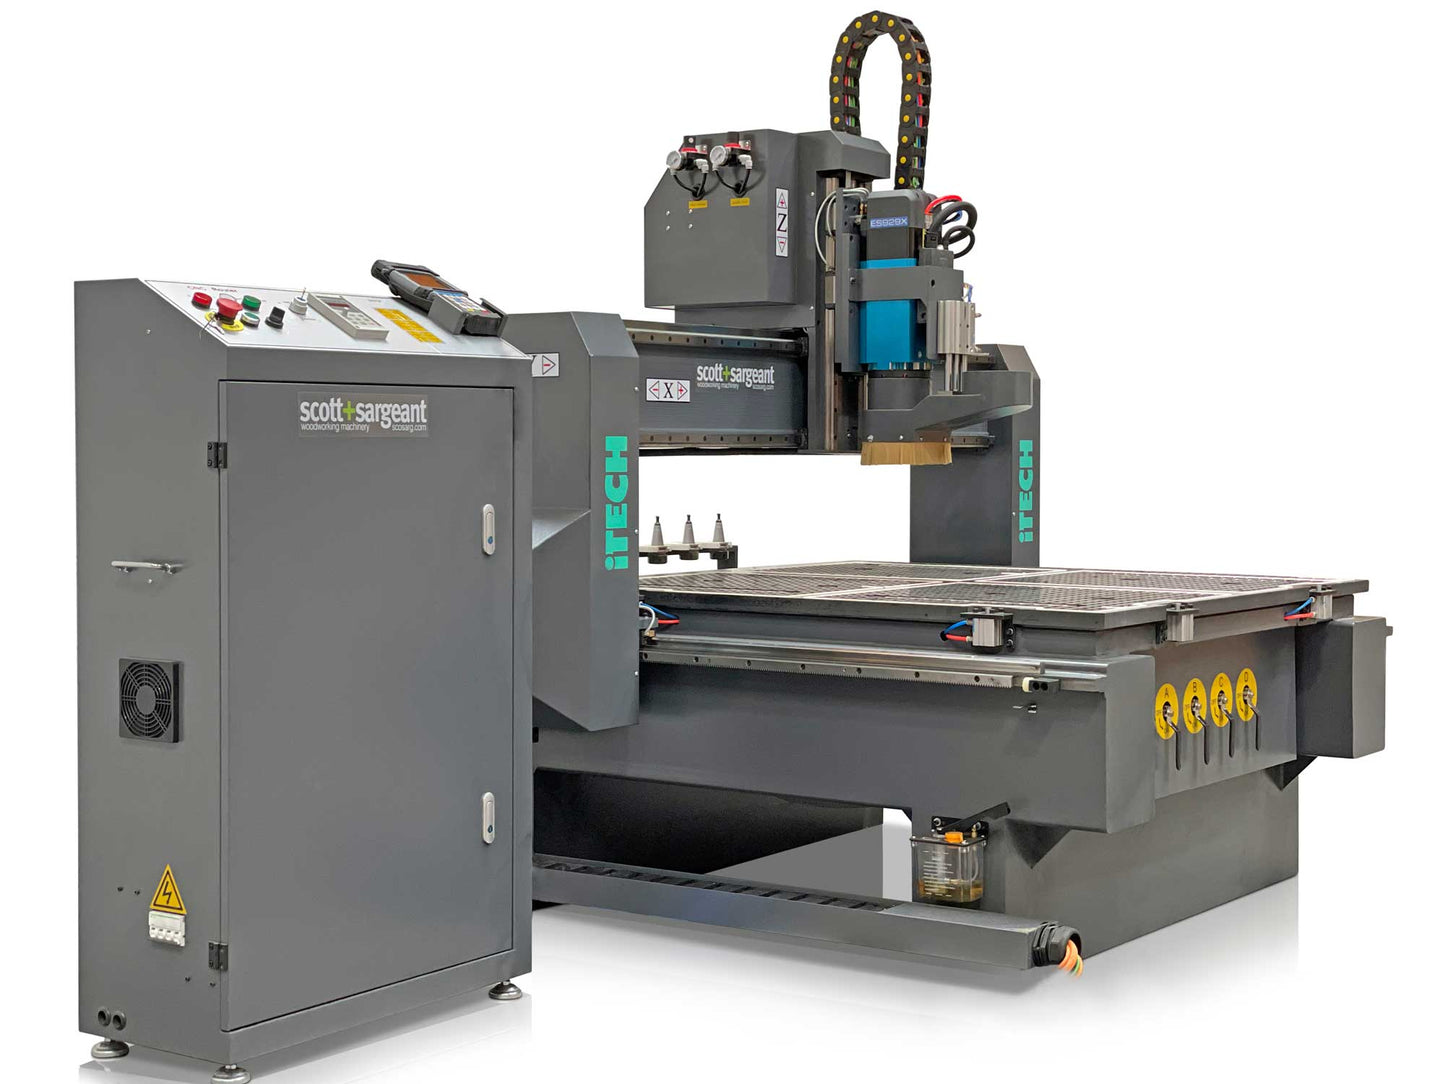 ITECH K45MT 4x4 CNC Router with ATC